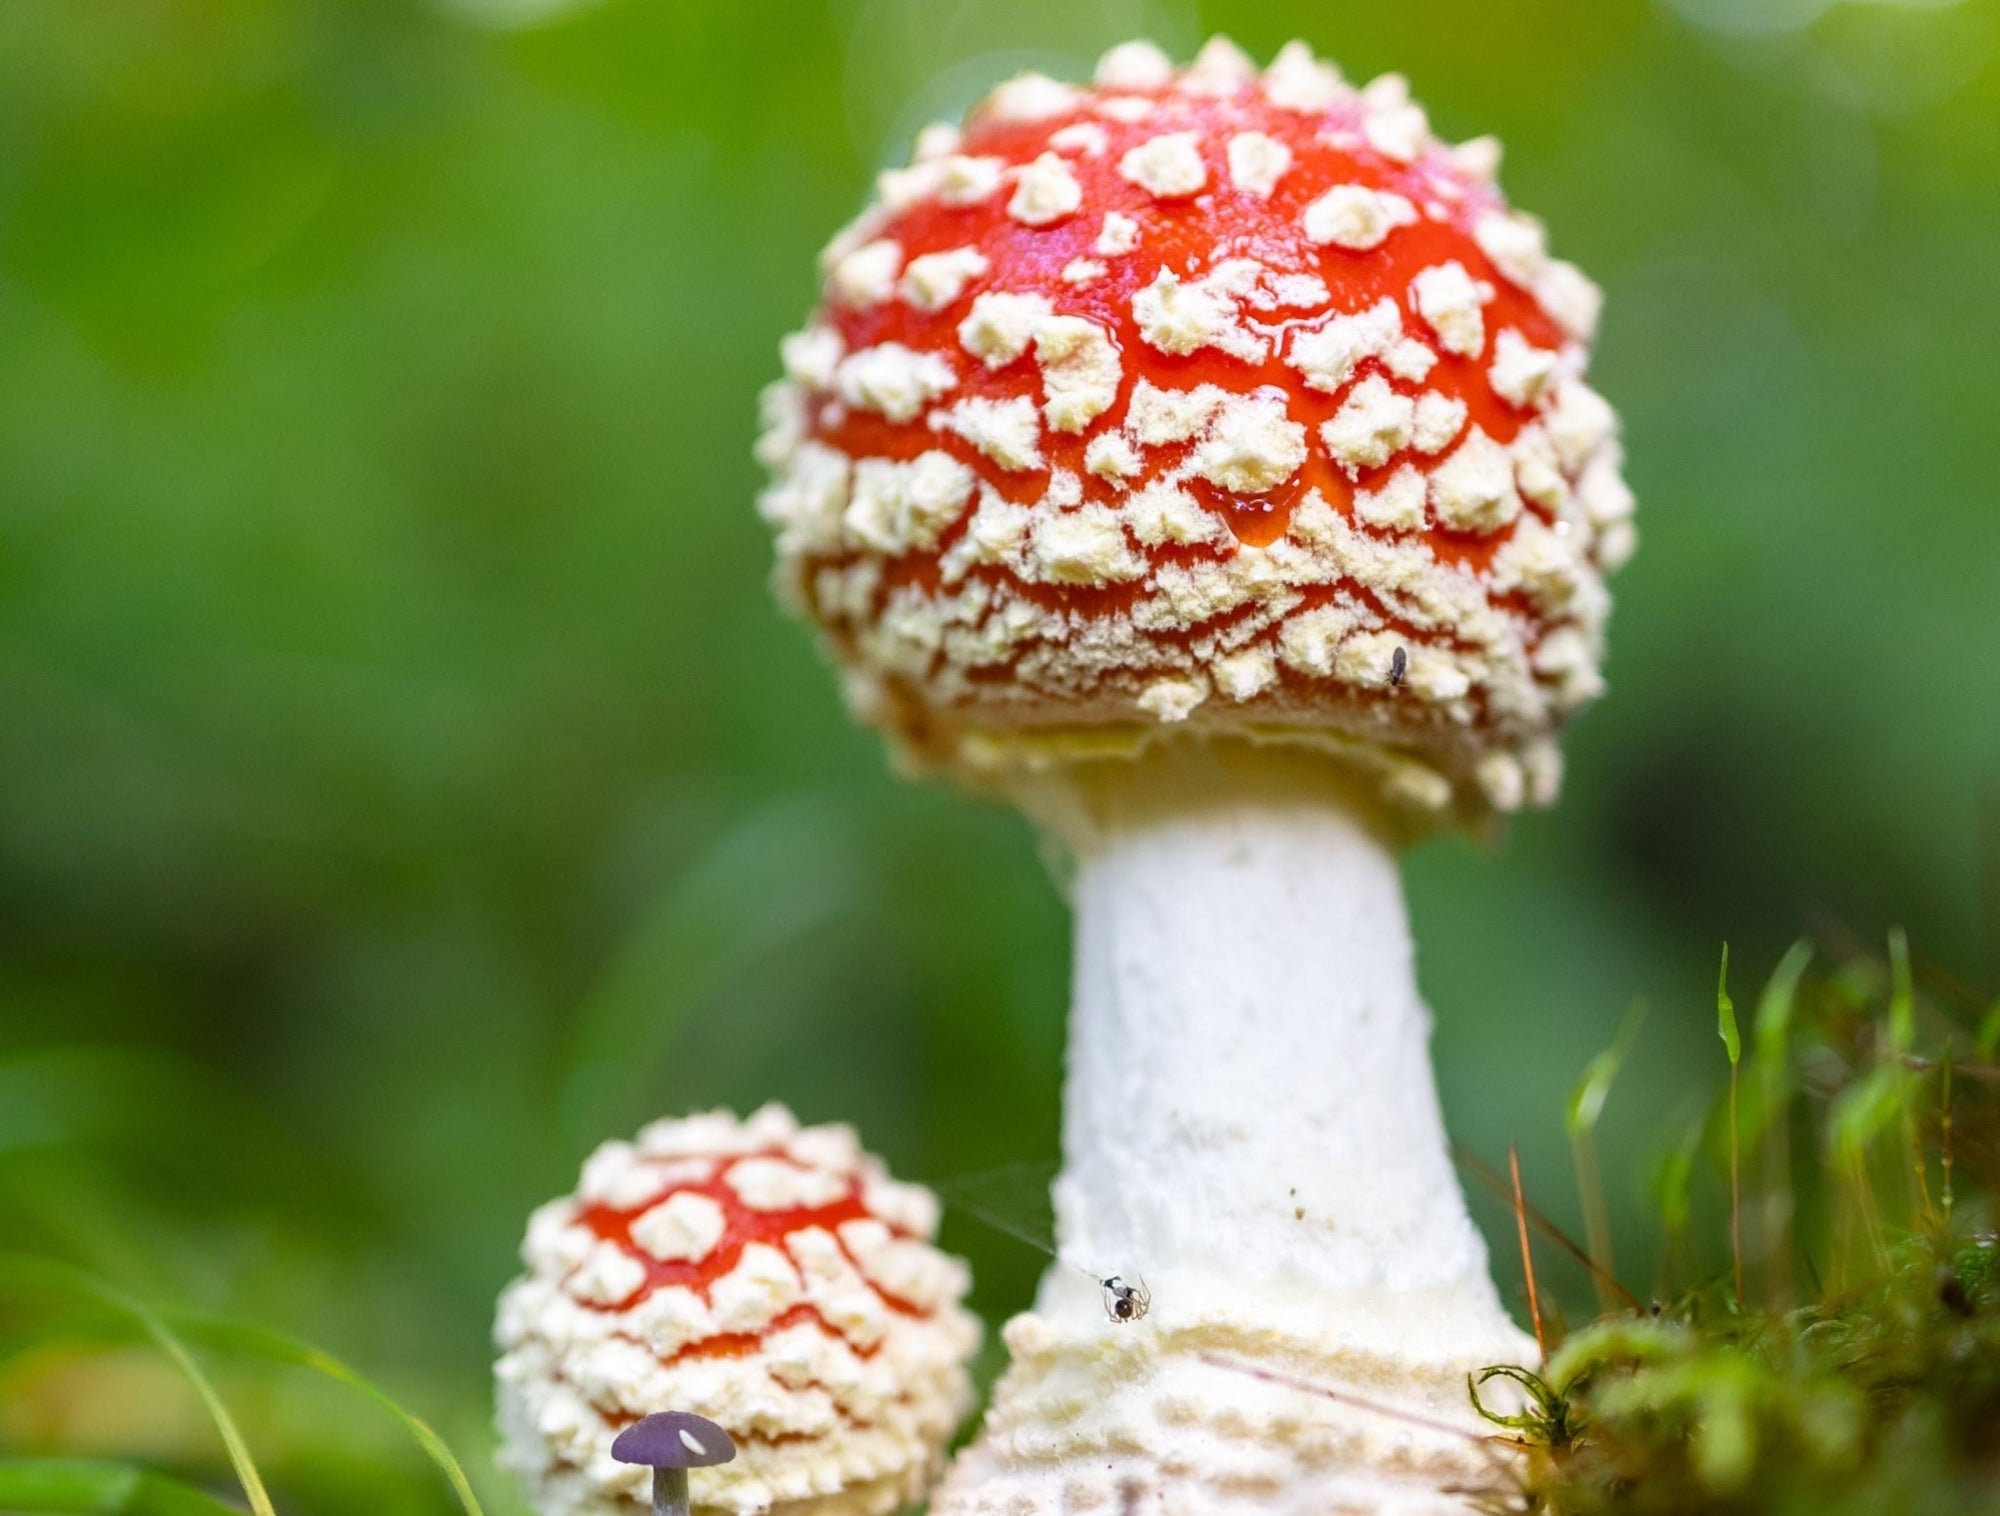 Mushrooms For ADHD - Help Manage Your Symptoms - jrny